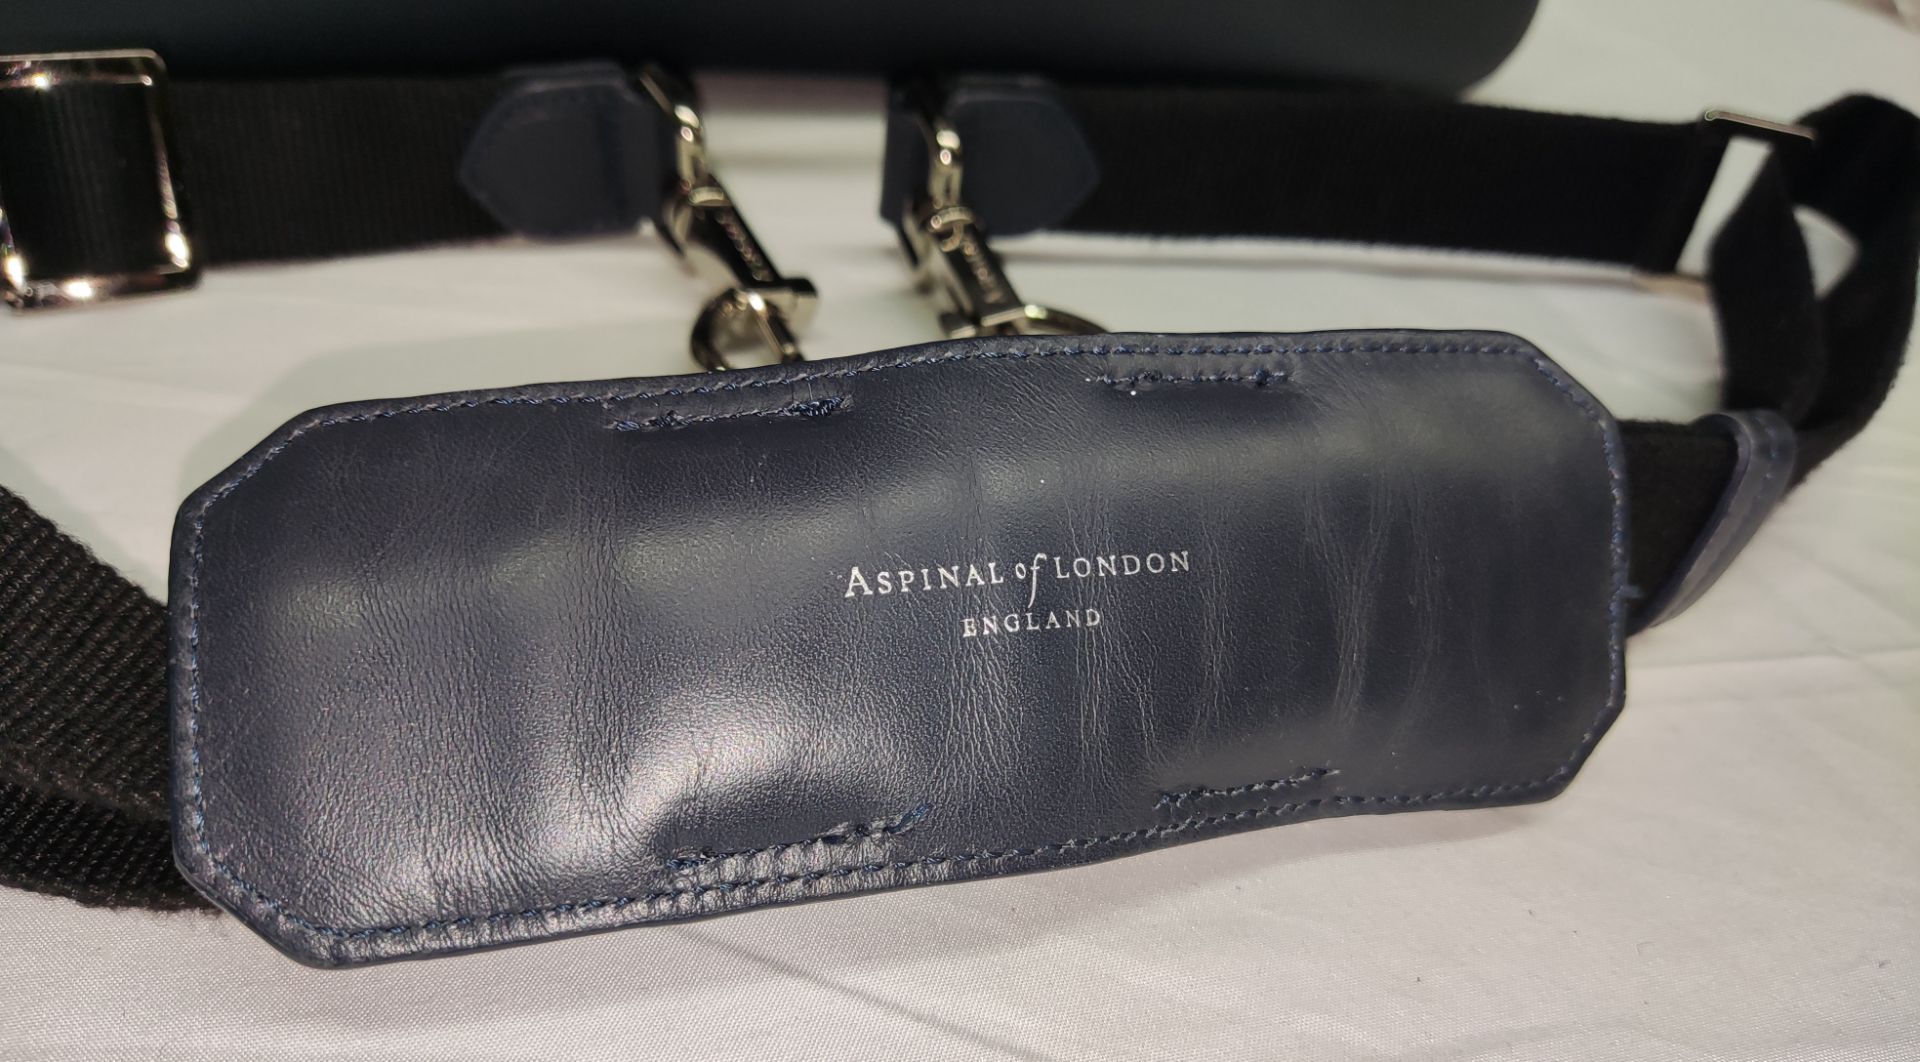 1 x ASPINAL OF LONDON Mount Street Small Laptop Bag In Black Saffiano - Original RRP £650 - Ref: - Image 16 of 21